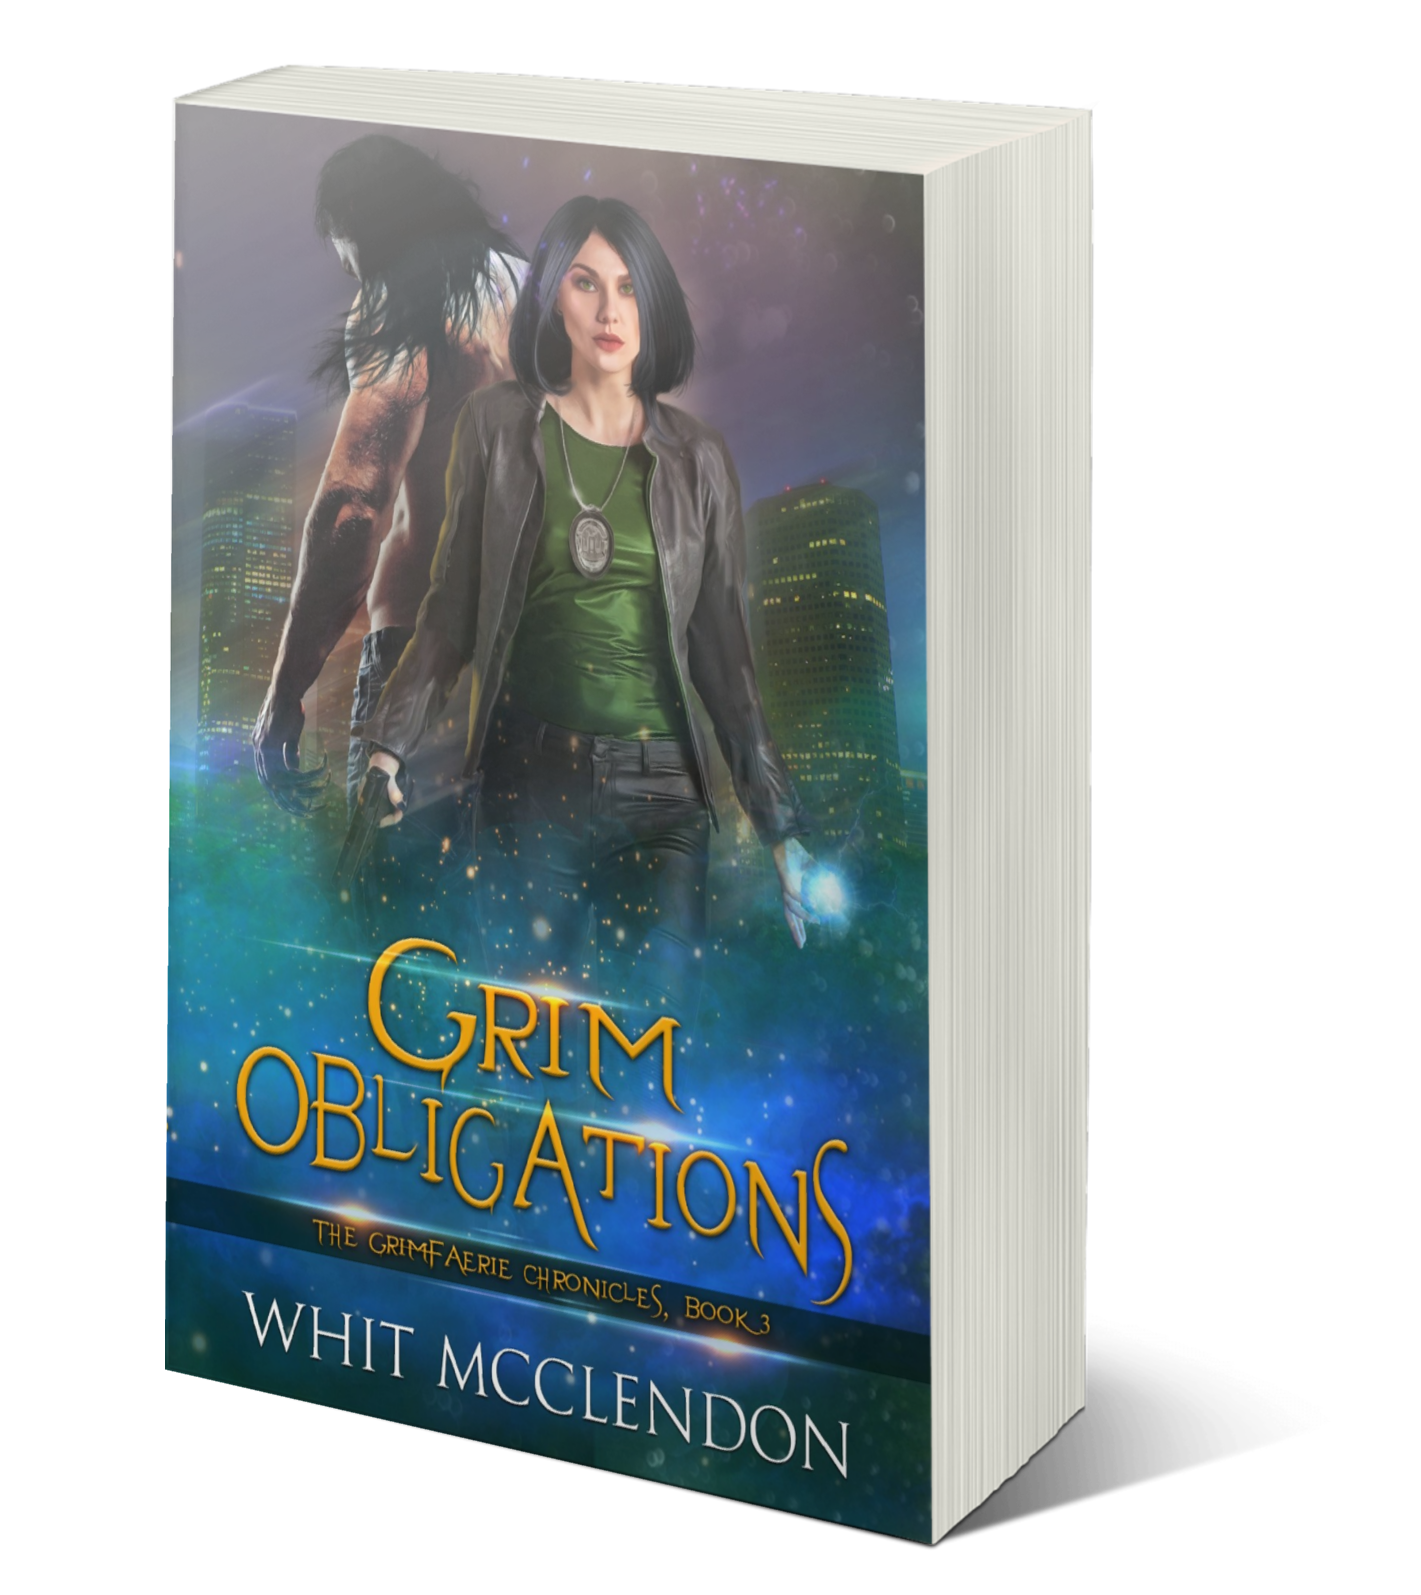 New Release from Whit McClendon!